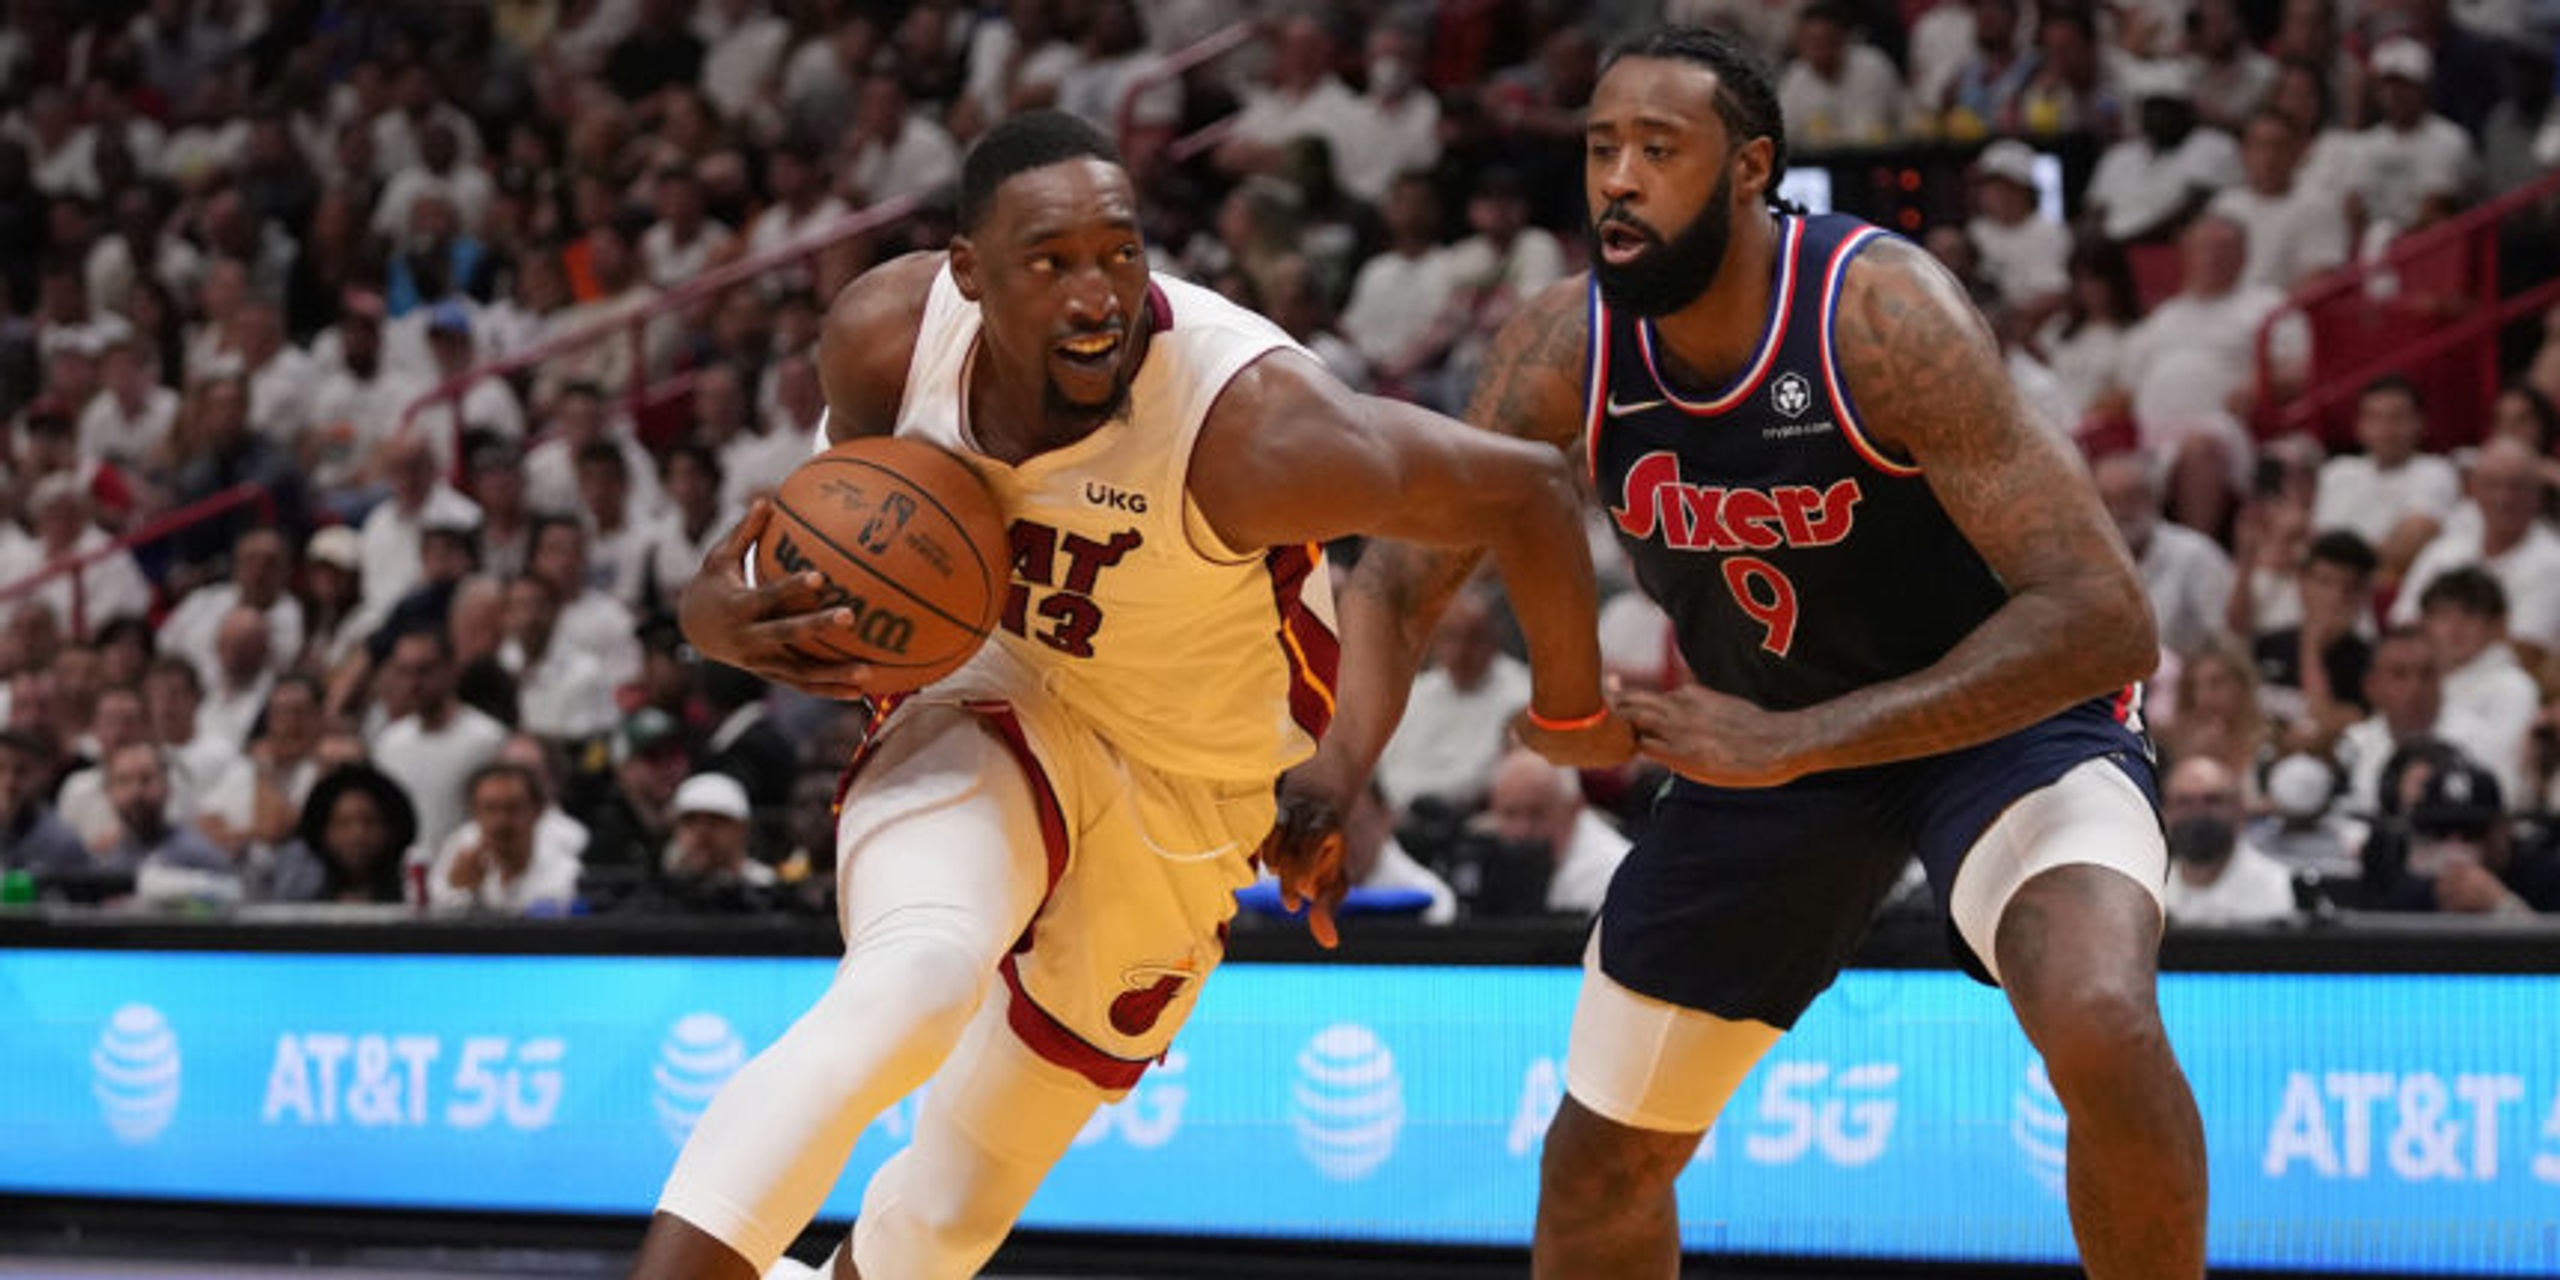 Bam Adebayo stands at the core of the Heat's second-round dominance